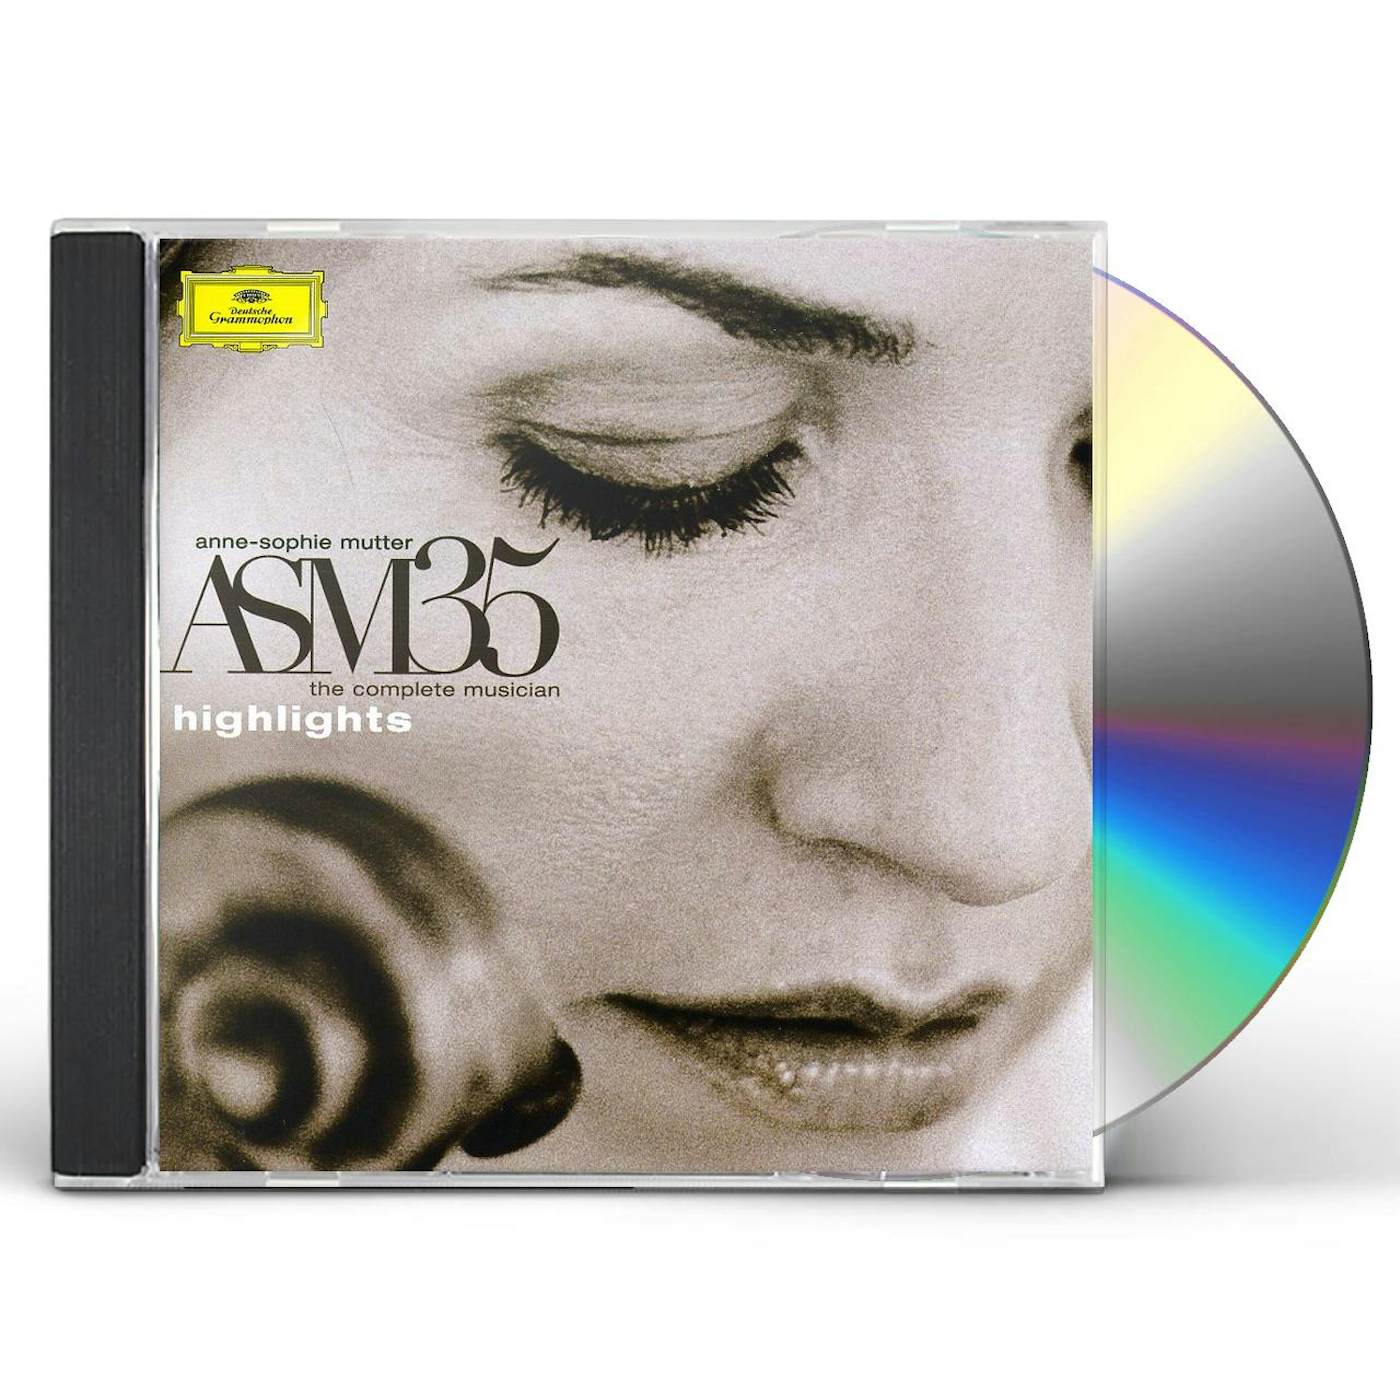 Anne-Sophie Mutter ASM 35: THE COMPLETE MUSICIAN - HIGHLIGHTS CD